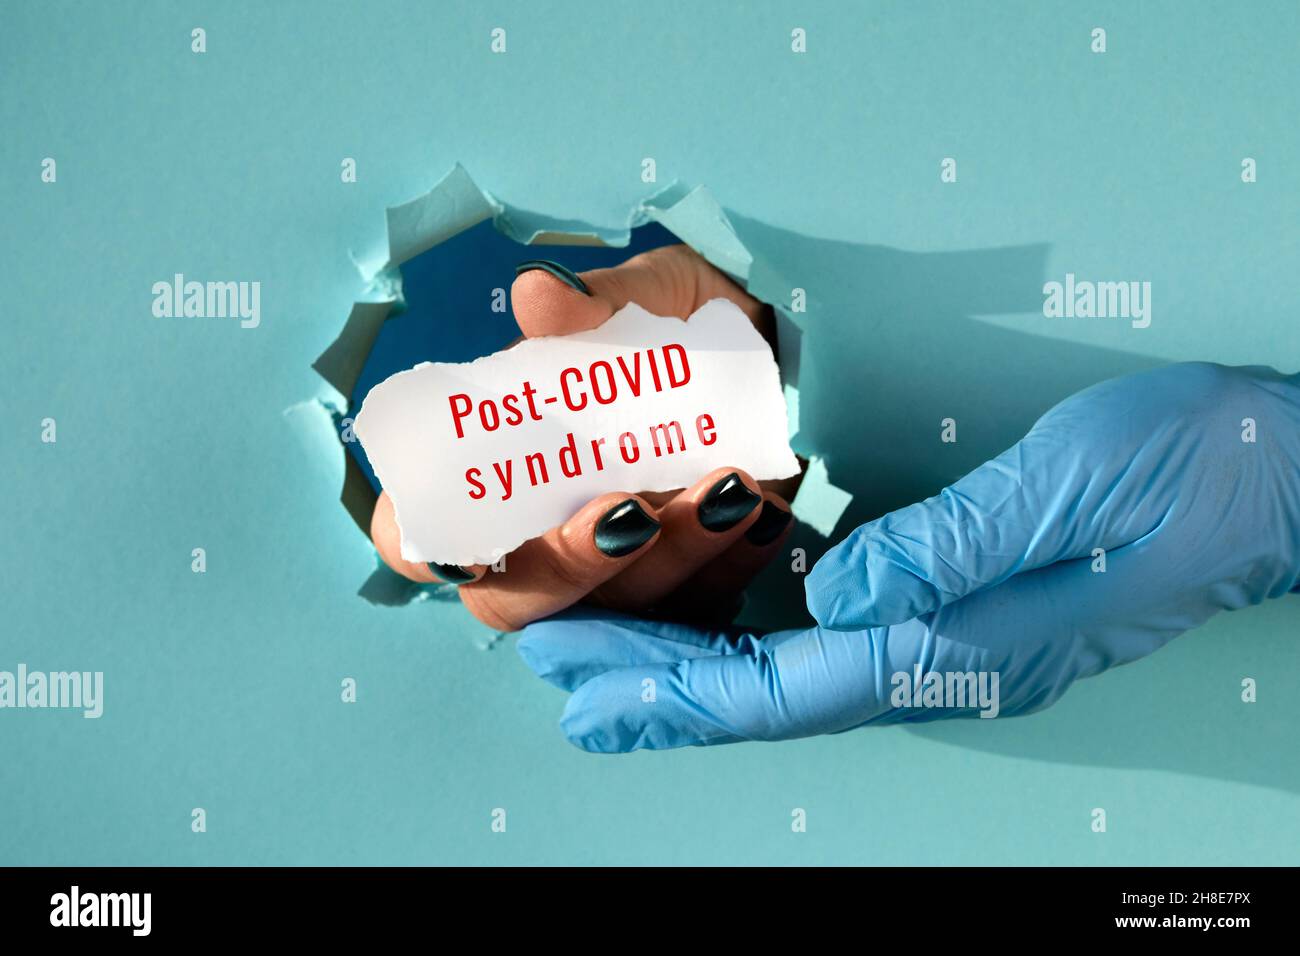 Post Covid syndrome, long covid. Hand in glove supporting hand with text on  scrap of paper in paper hole Stock Photo - Alamy